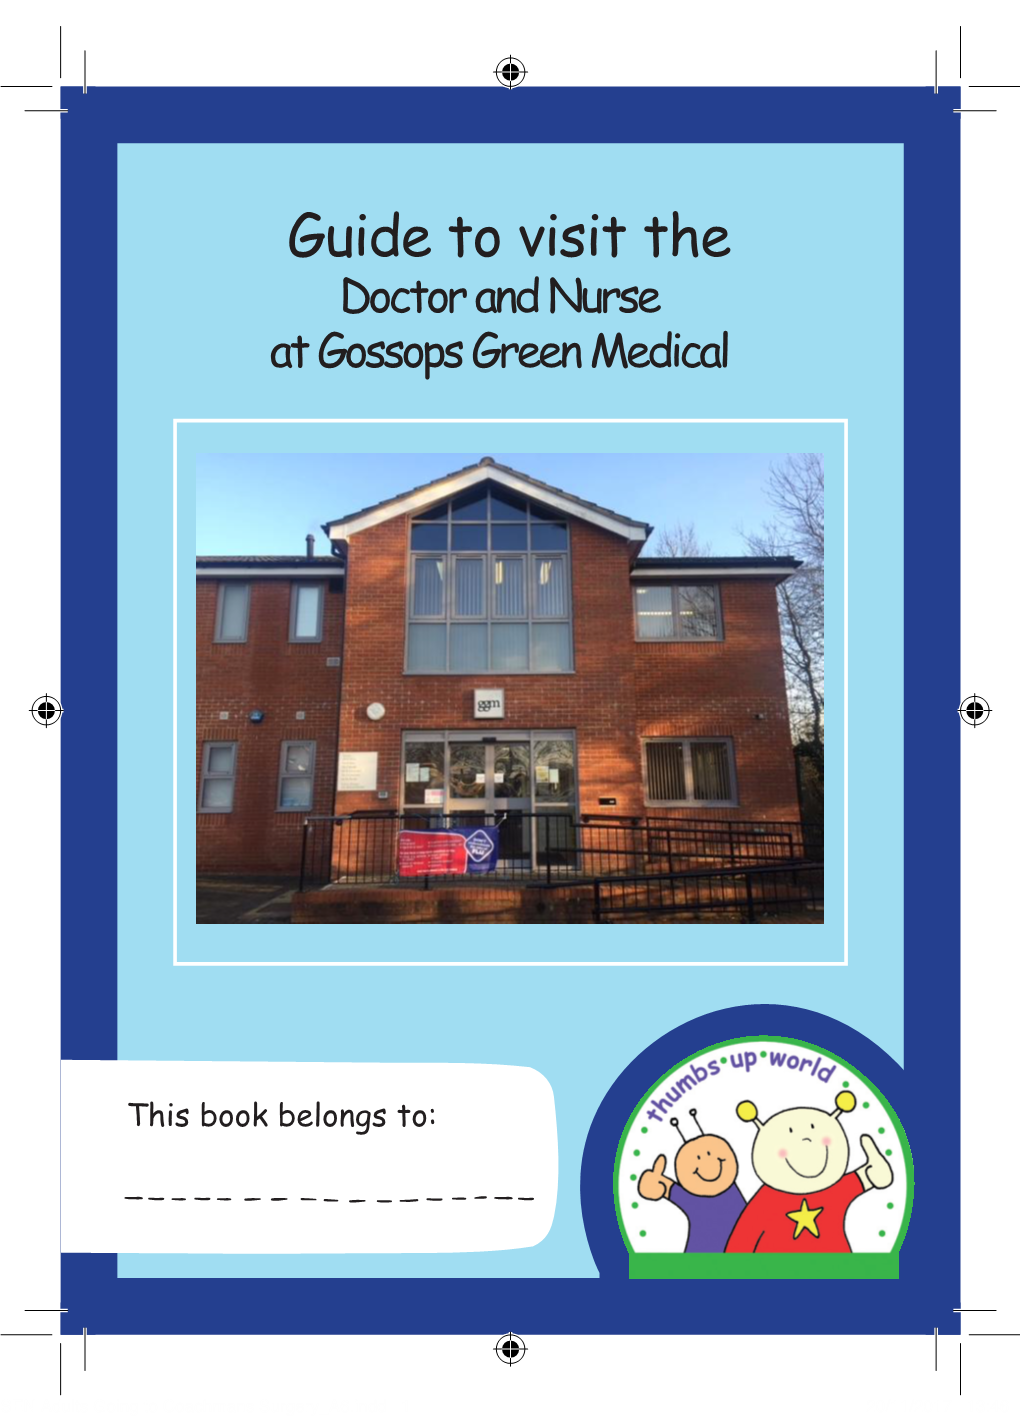 Your Guide to Visiting the Doctors and Nurses at Gossops Green Medical